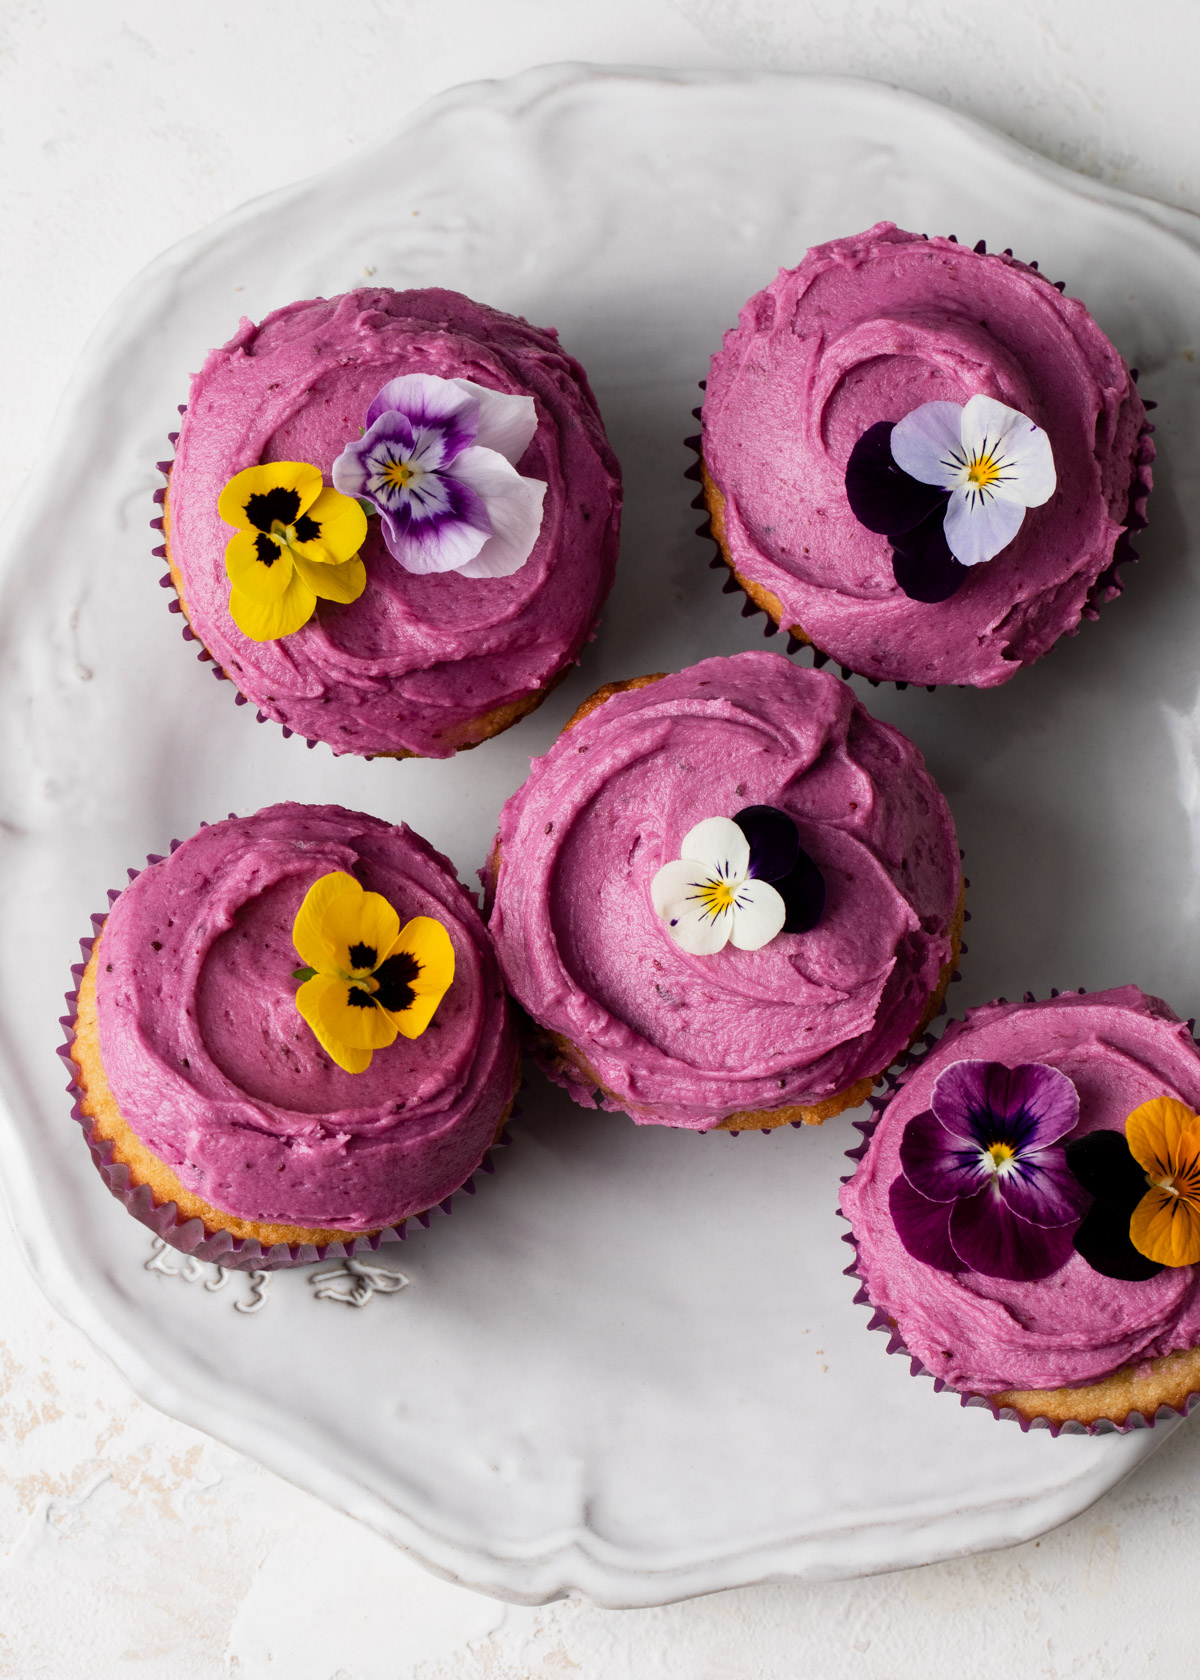 Frosted blueberry cupcakes with purple frosting and edible flowers on top